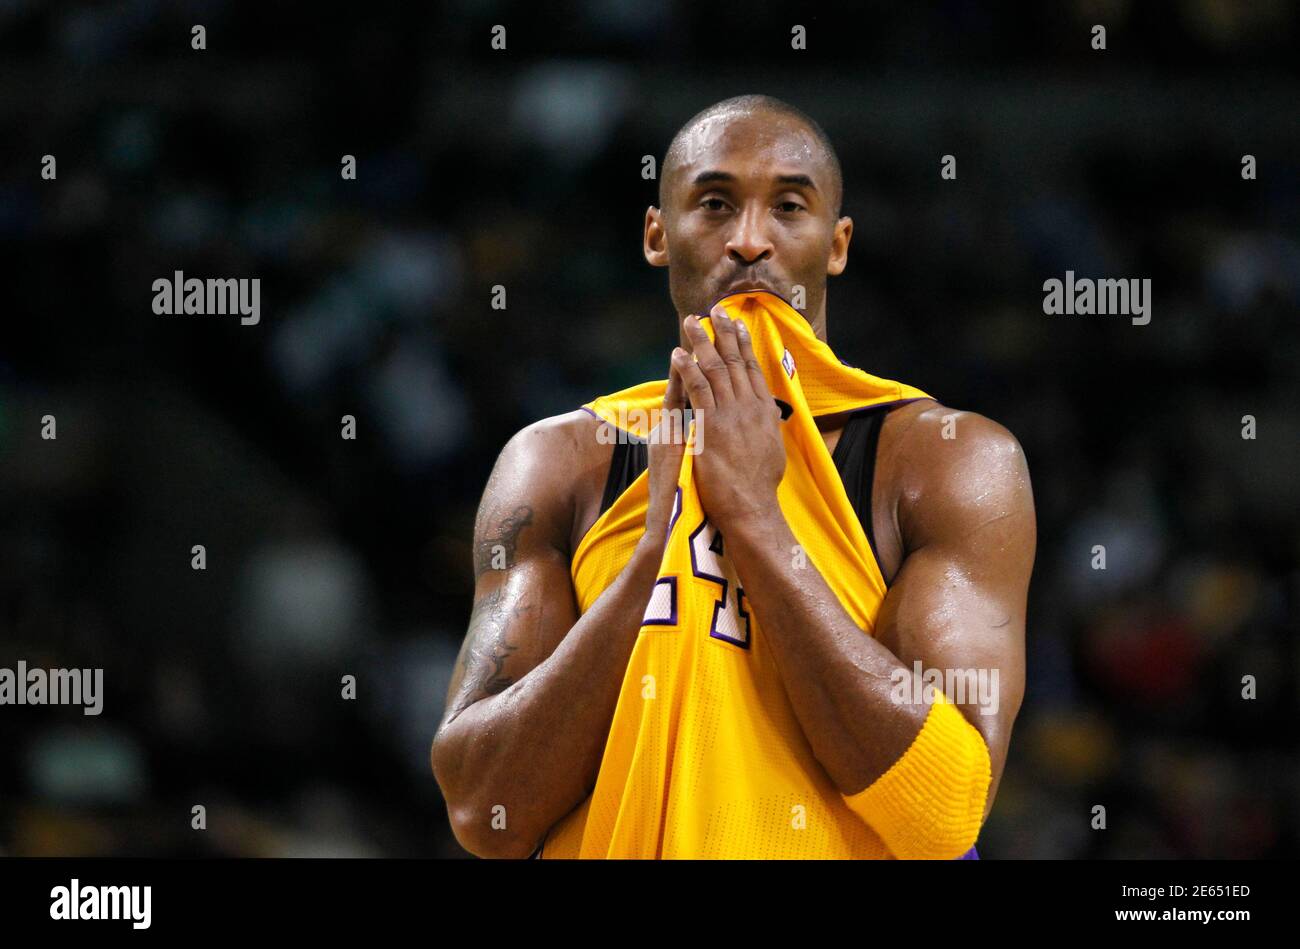 Los Angeles Lakers Kobe Bryant bites his jersey during a break in action  against the Boston Celtics in the first half of their NBA basketball game  at TD Garden in Boston, Massachusetts